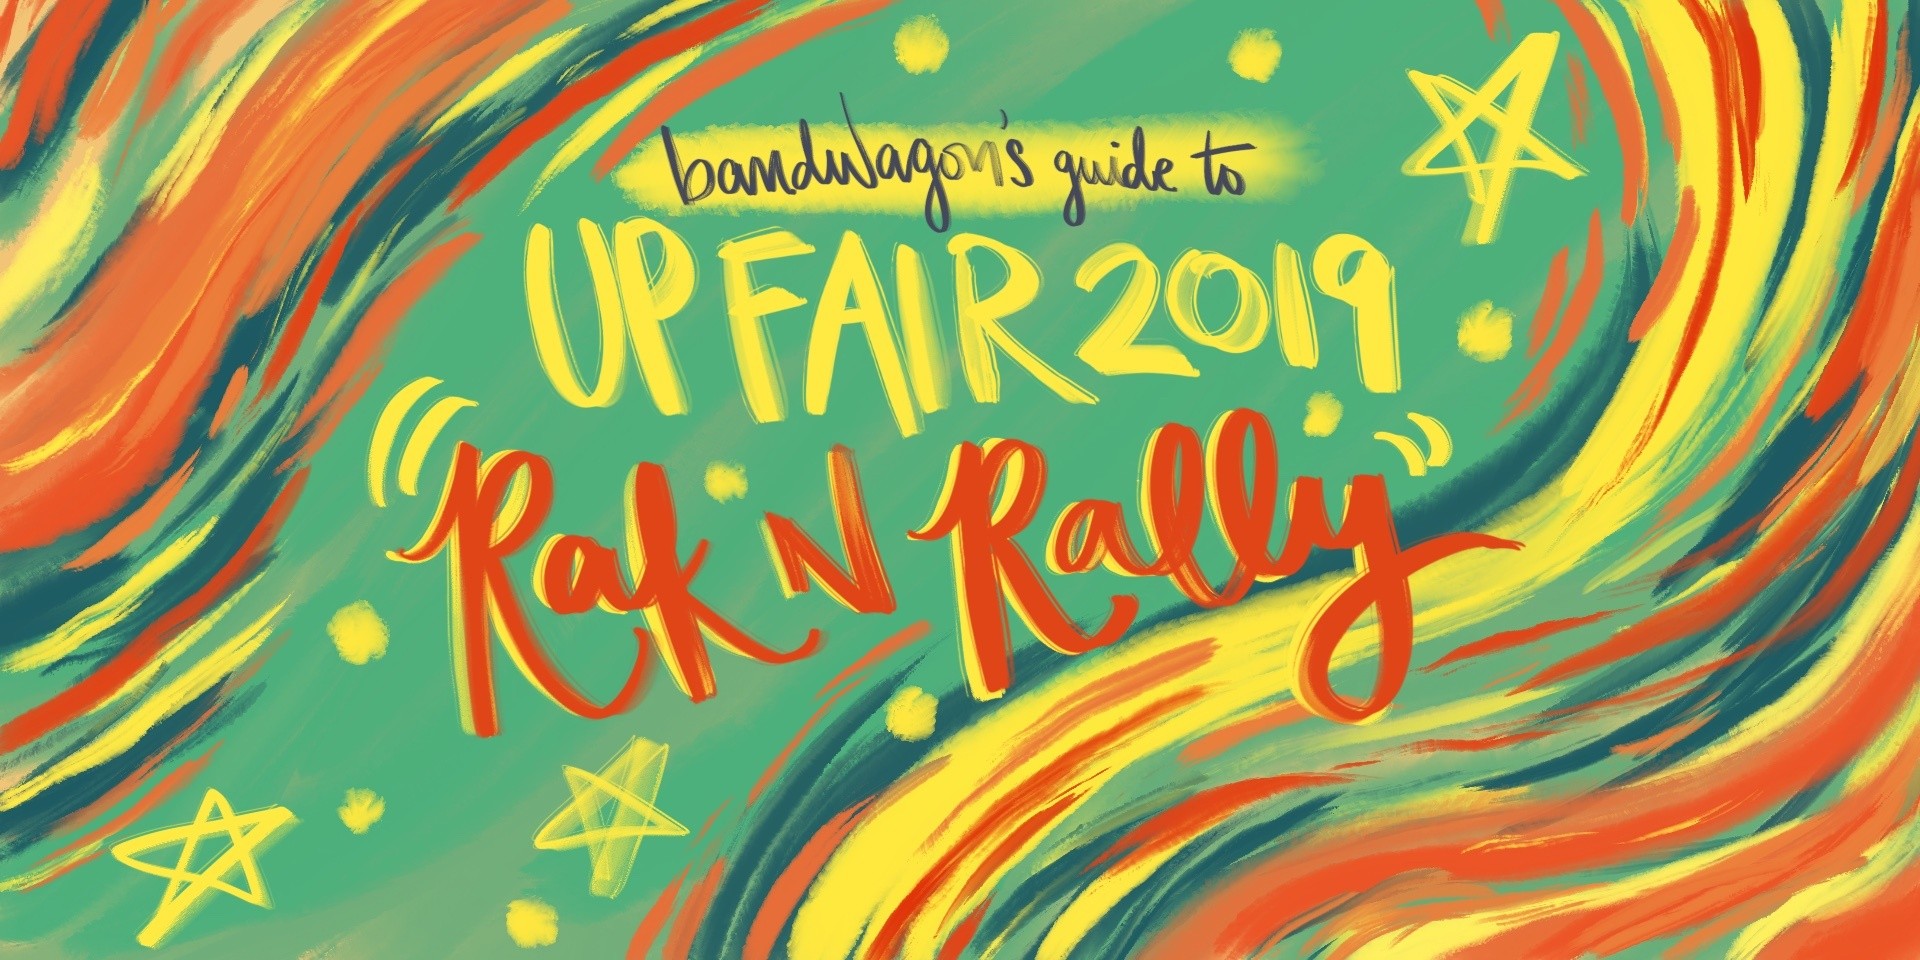 Bandwagon's Guide to UP Fair 2019